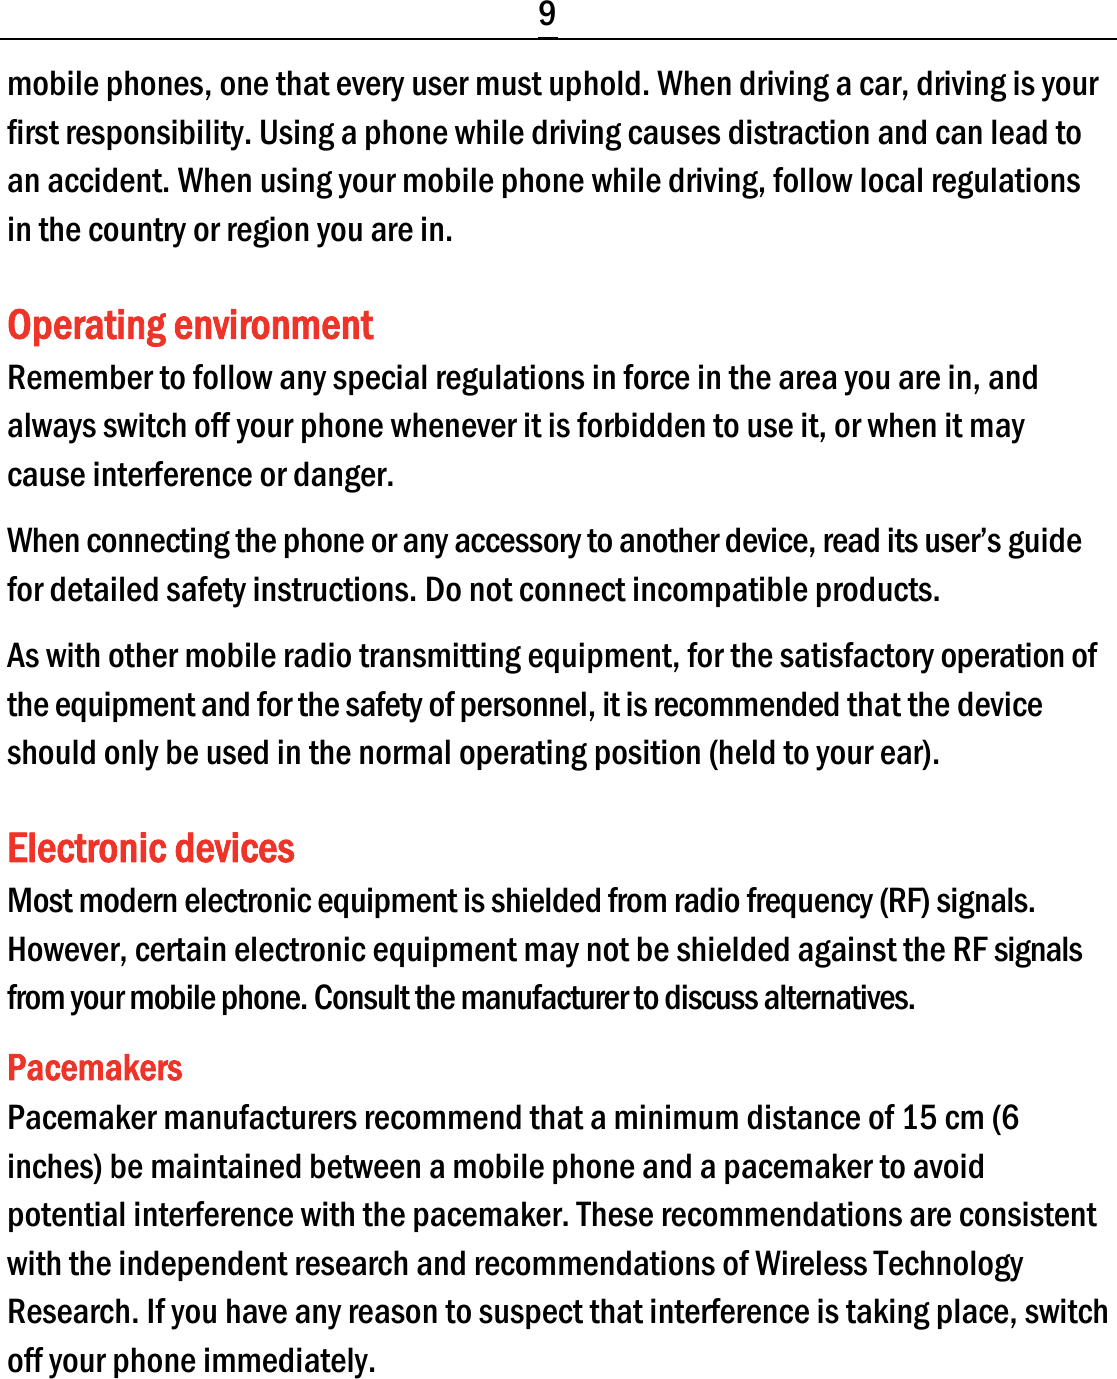  9 mobile phones, one that every user must uphold. When driving a car, driving is your first responsibility. Using a phone while driving causes distraction and can lead to an accident. When using your mobile phone while driving, follow local regulations in the country or region you are in. Operating environment Remember to follow any special regulations in force in the area you are in, and always switch off your phone whenever it is forbidden to use it, or when it may cause interference or danger. When connecting the phone or any accessory to another device, read its user’s guide for detailed safety instructions. Do not connect incompatible products. As with other mobile radio transmitting equipment, for the satisfactory operation of the equipment and for the safety of personnel, it is recommended that the device should only be used in the normal operating position (held to your ear). Electronic devices Most modern electronic equipment is shielded from radio frequency (RF) signals. However, certain electronic equipment may not be shielded against the RF signals from your mobile phone. Consult the manufacturer to discuss alternatives. Pacemakers Pacemaker manufacturers recommend that a minimum distance of 15 cm (6 inches) be maintained between a mobile phone and a pacemaker to avoid potential interference with the pacemaker. These recommendations are consistent with the independent research and recommendations of Wireless Technology Research. If you have any reason to suspect that interference is taking place, switch off your phone immediately. 